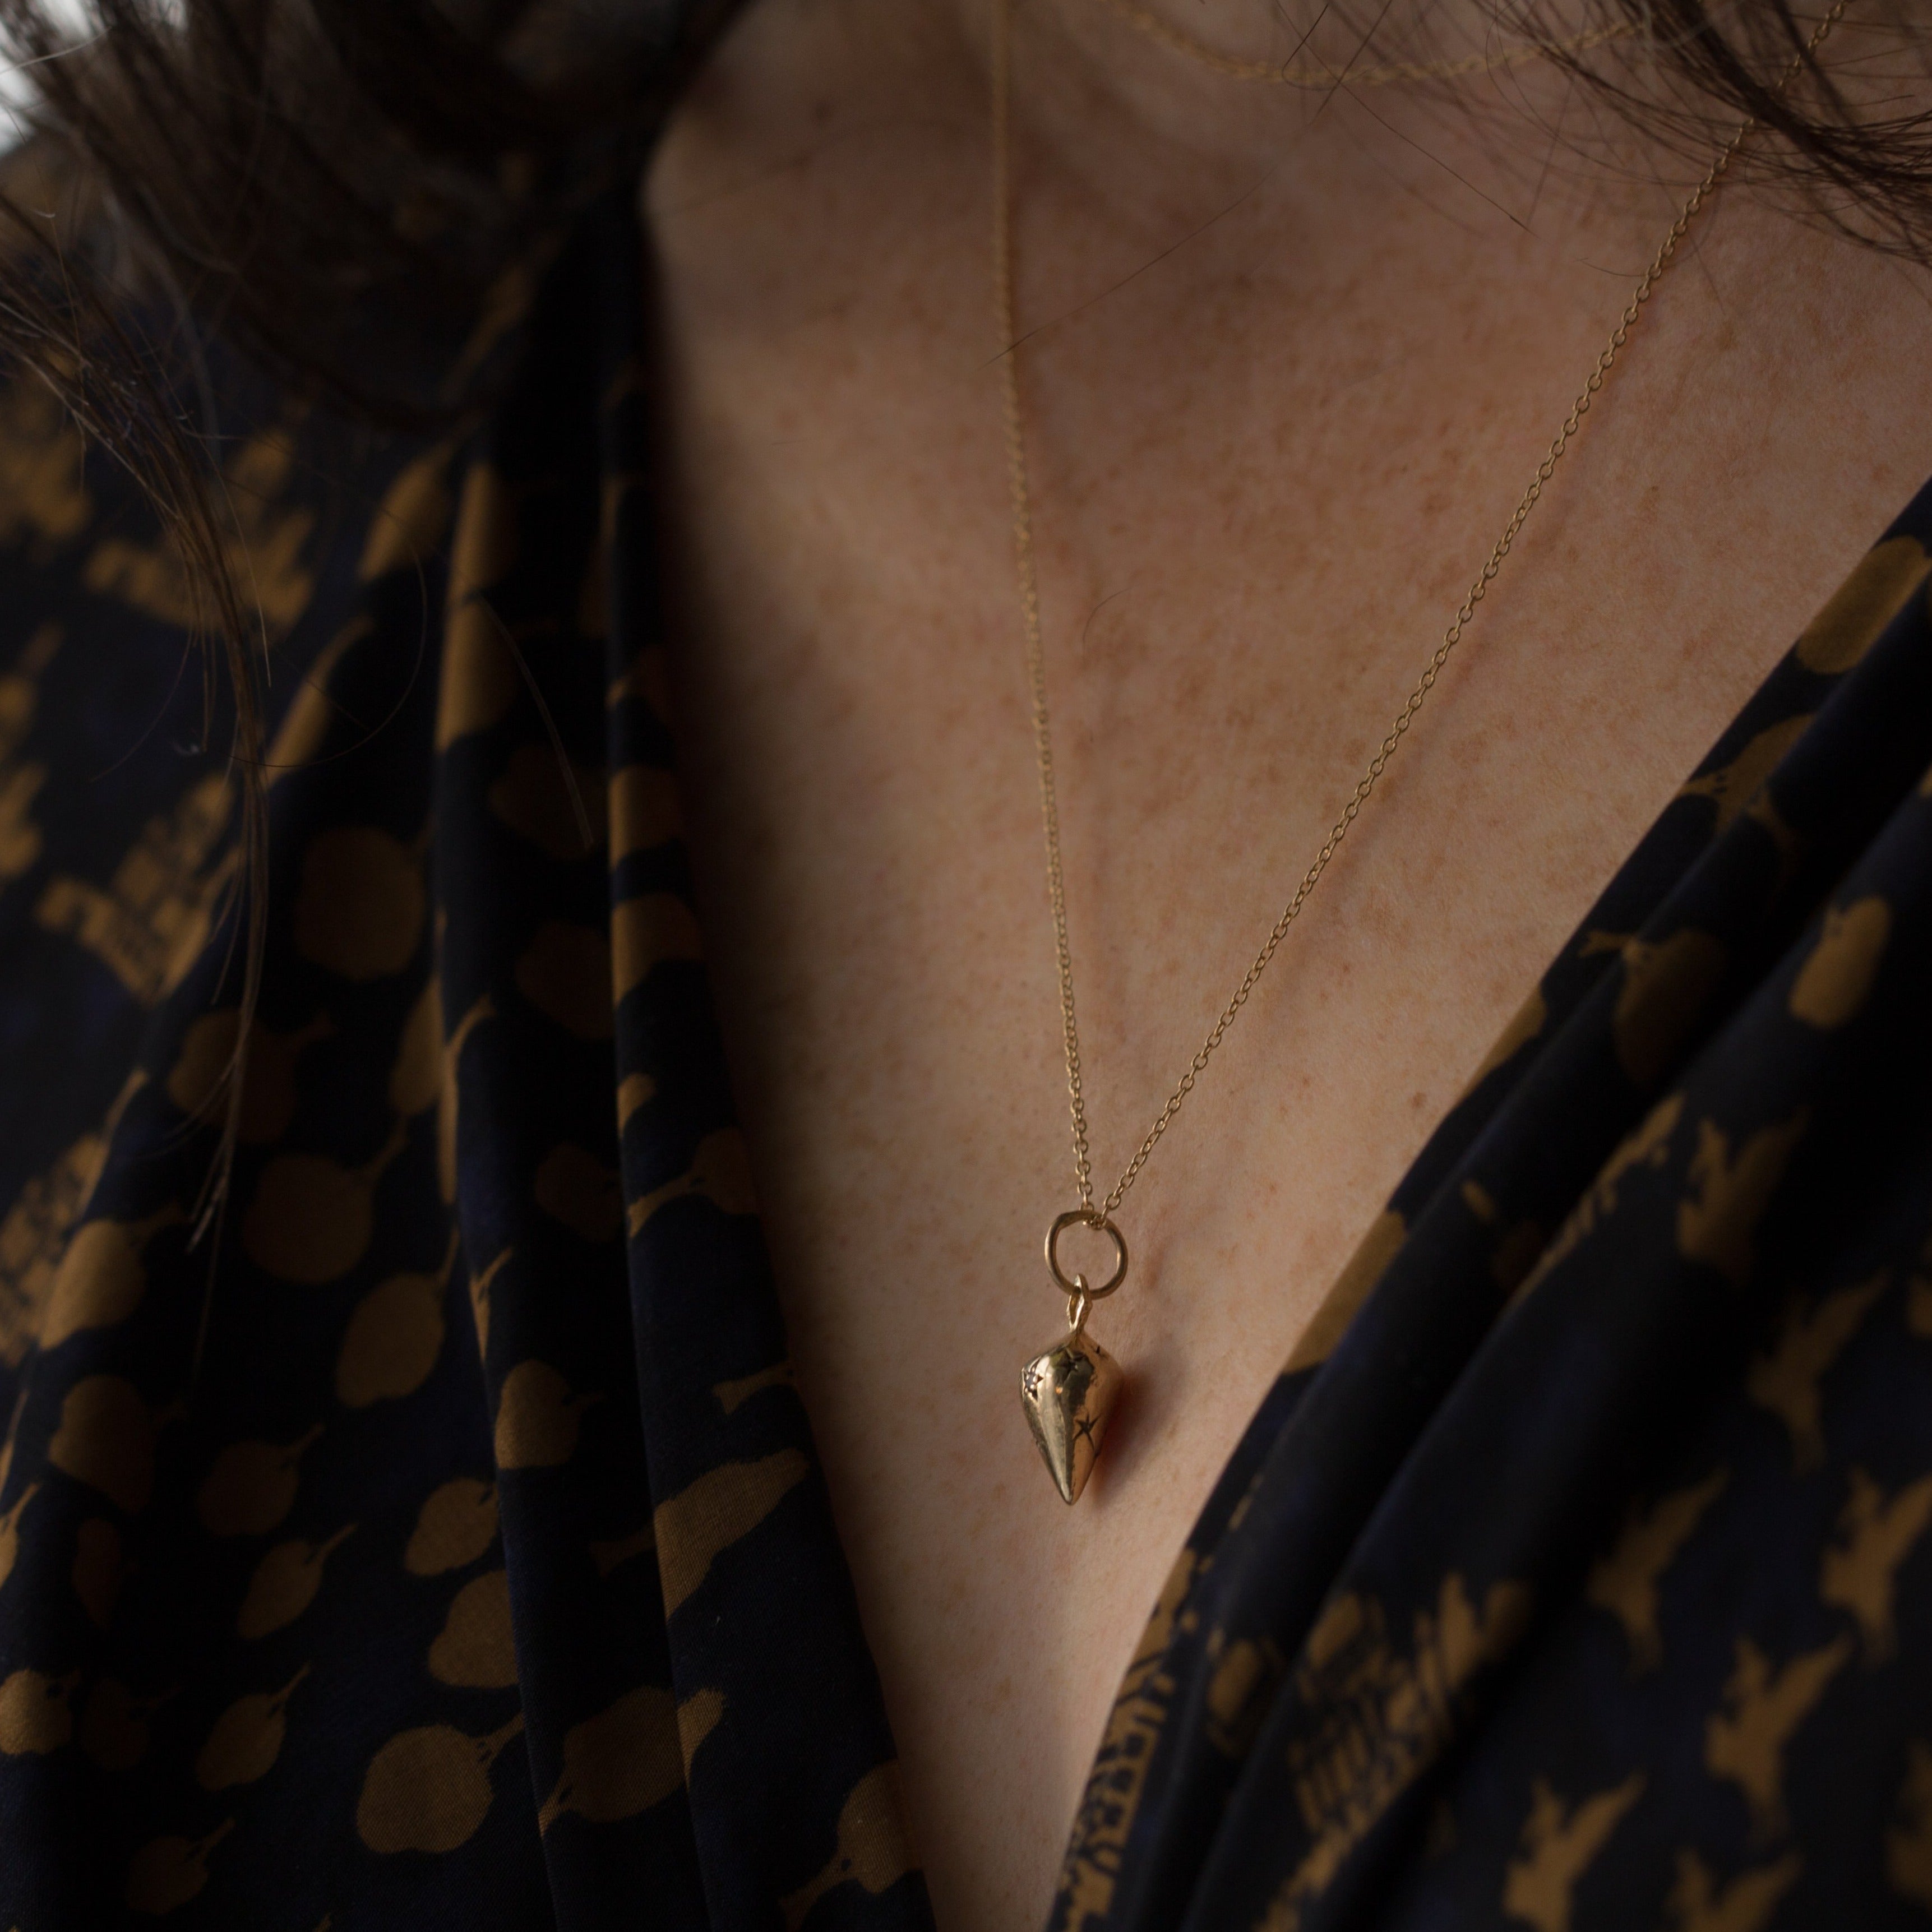 pendulum necklace, pendulum and stars necklace, solid gold necklace, holiday gift ideas for her, 12th house jewelry, ceremonial and celestial jewelry, wear with love, kelly star lannen, ethically sourced gemstones, black diamonds necklace, connect to your subconscious